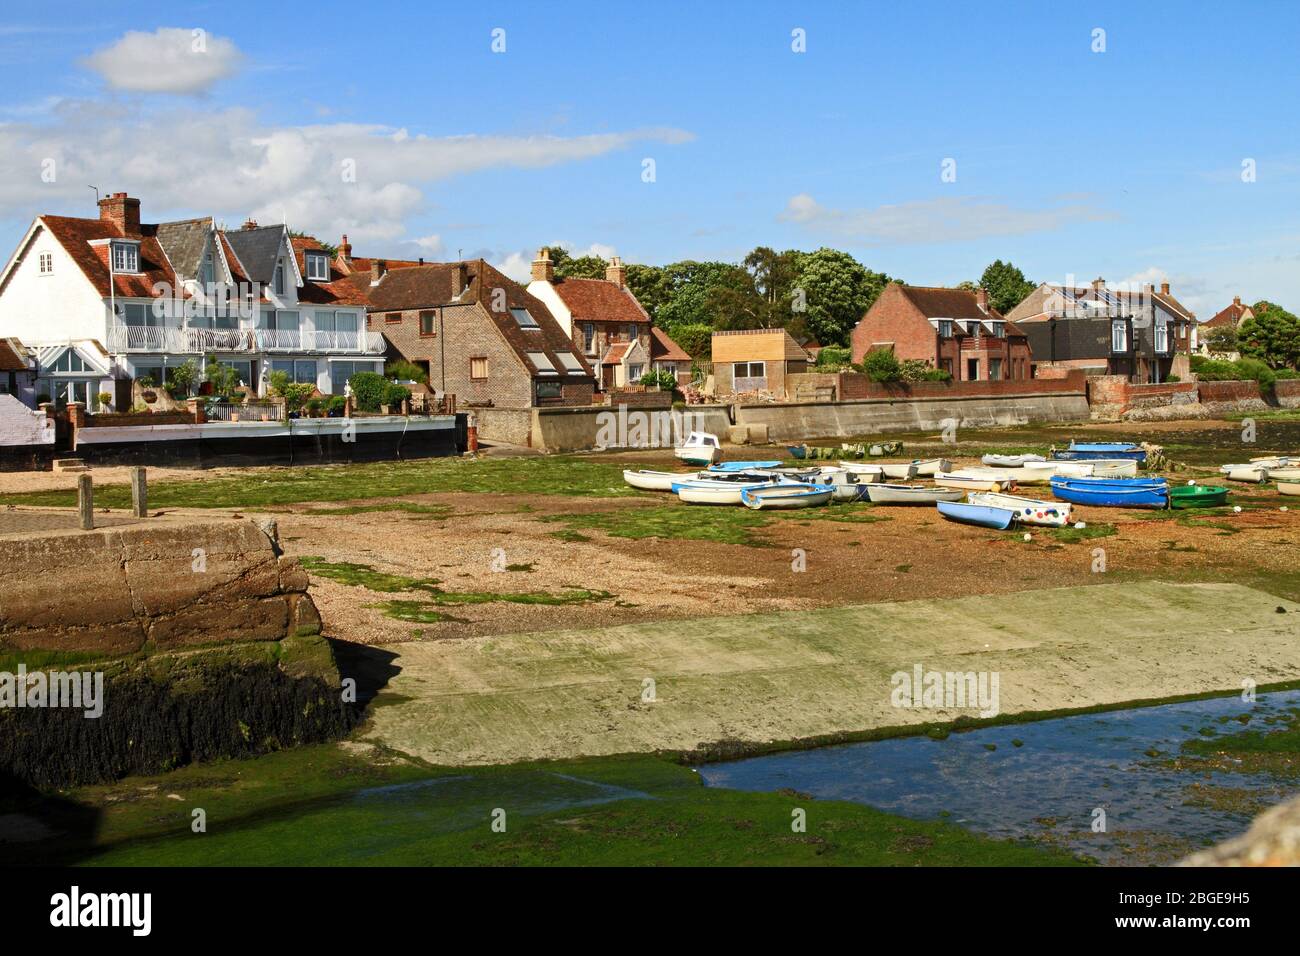 View of part of the harbour at Emsworth, Hampshire, England at low tide. The town once had a famous oyster industry. Stock Photo